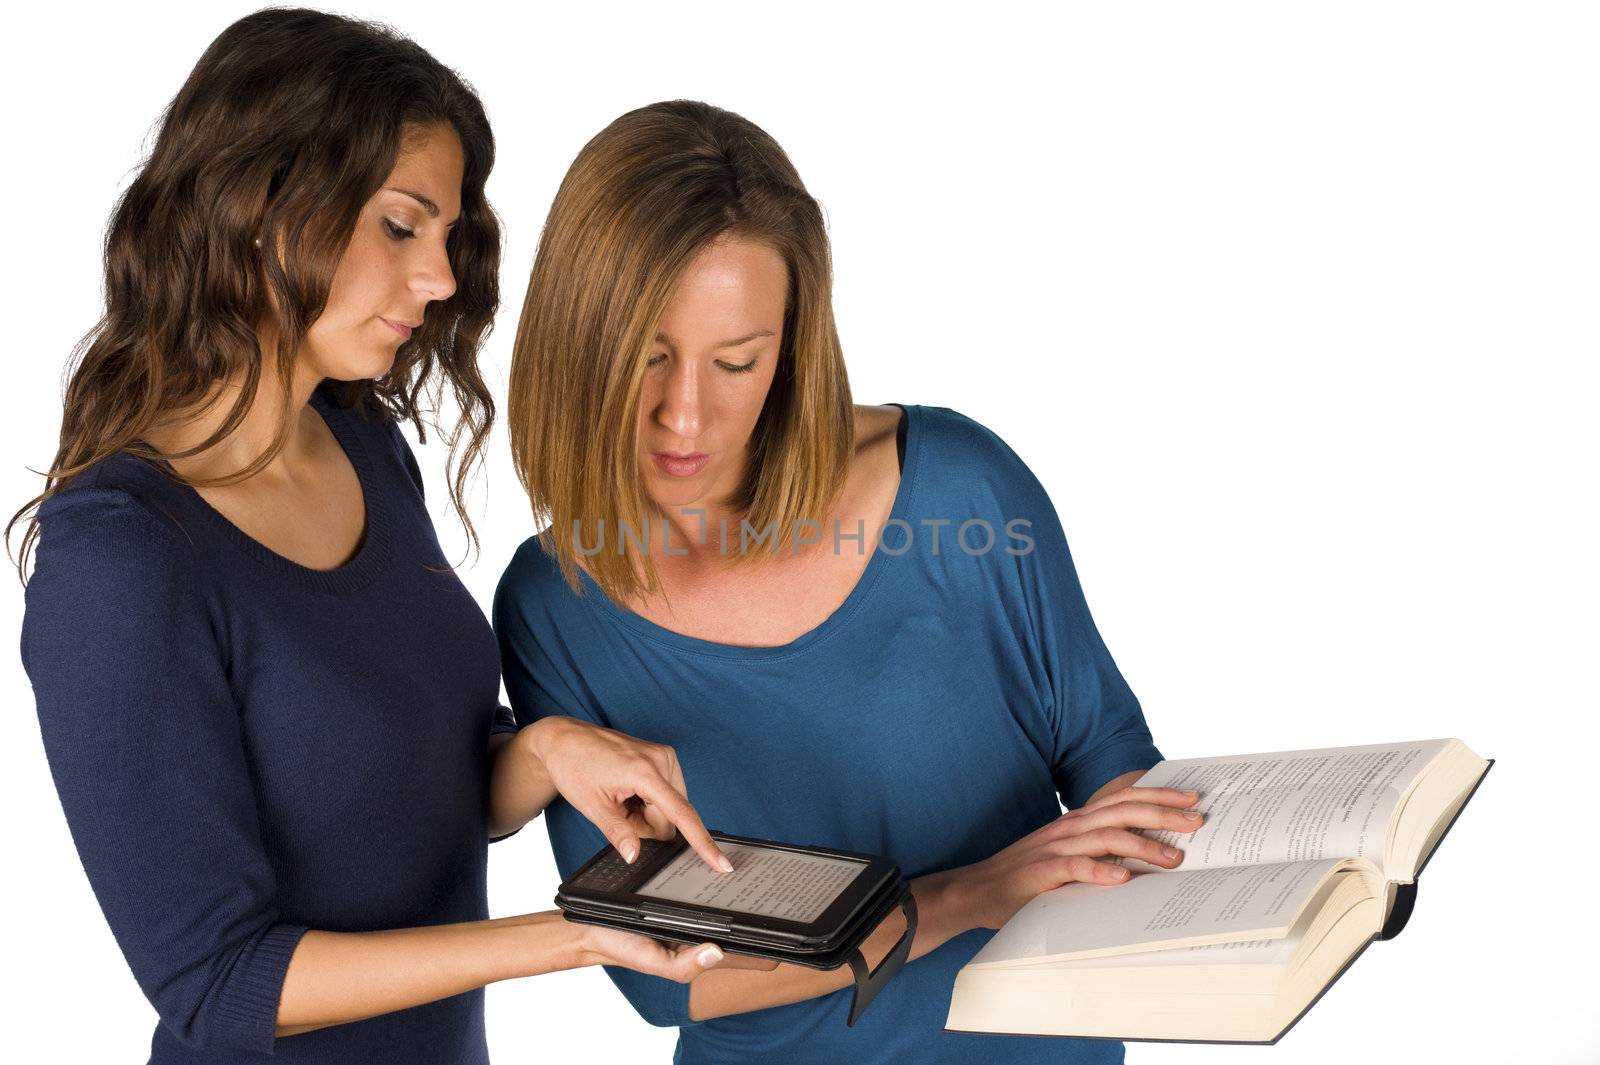 Students comparing a paper and an electronic book